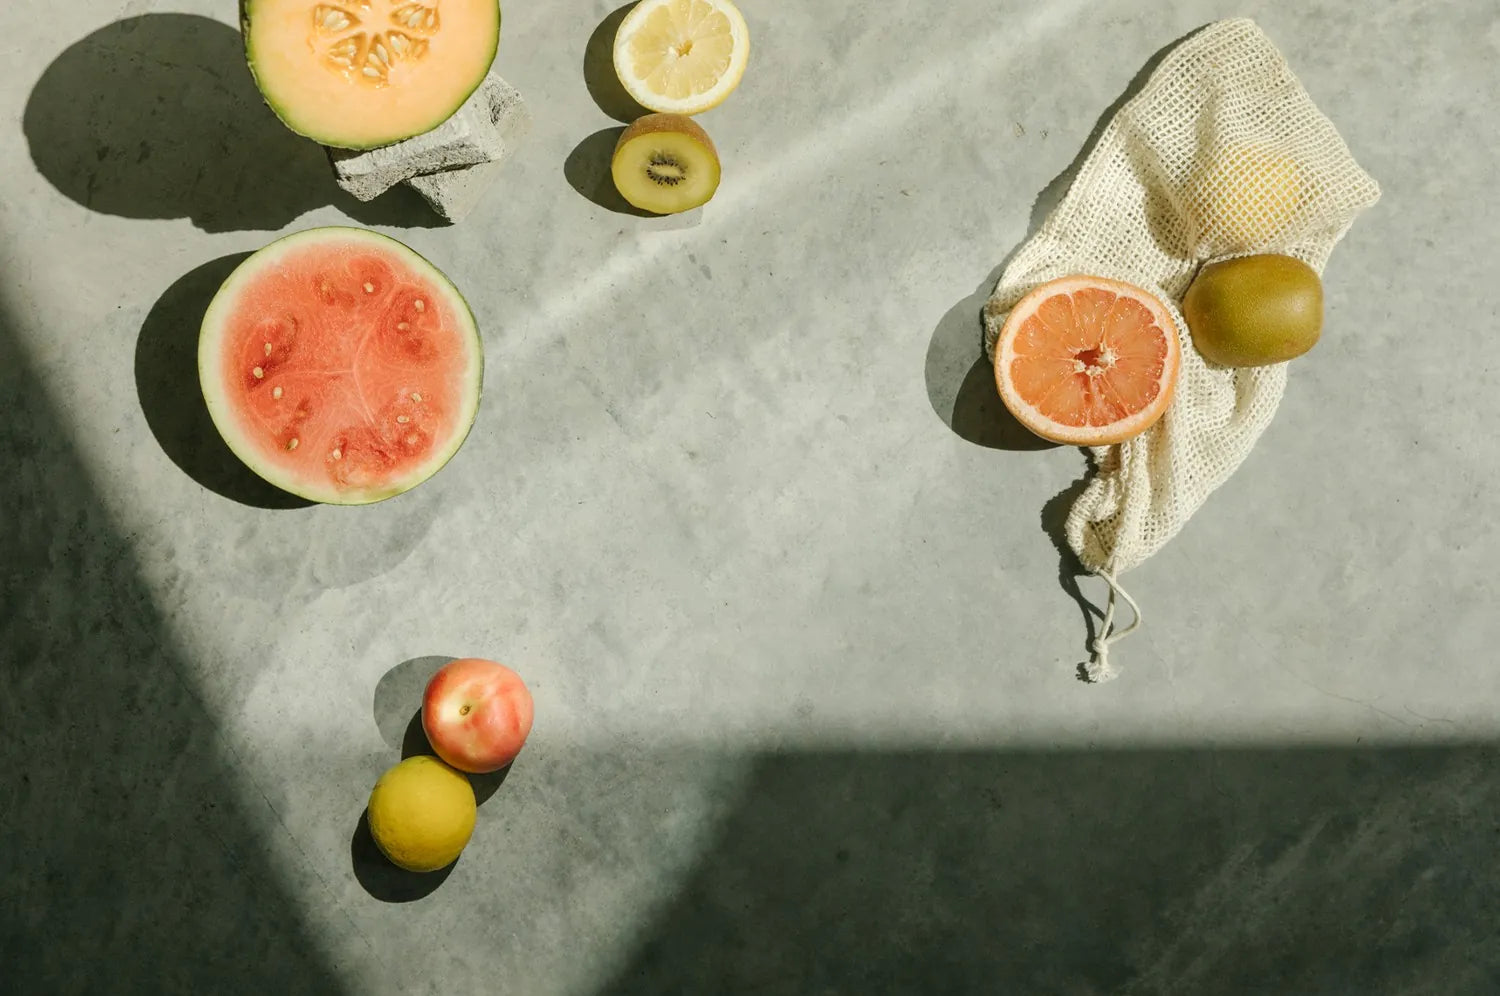 An overhead view of melons and citrus fruits arranged on a concrete counter.